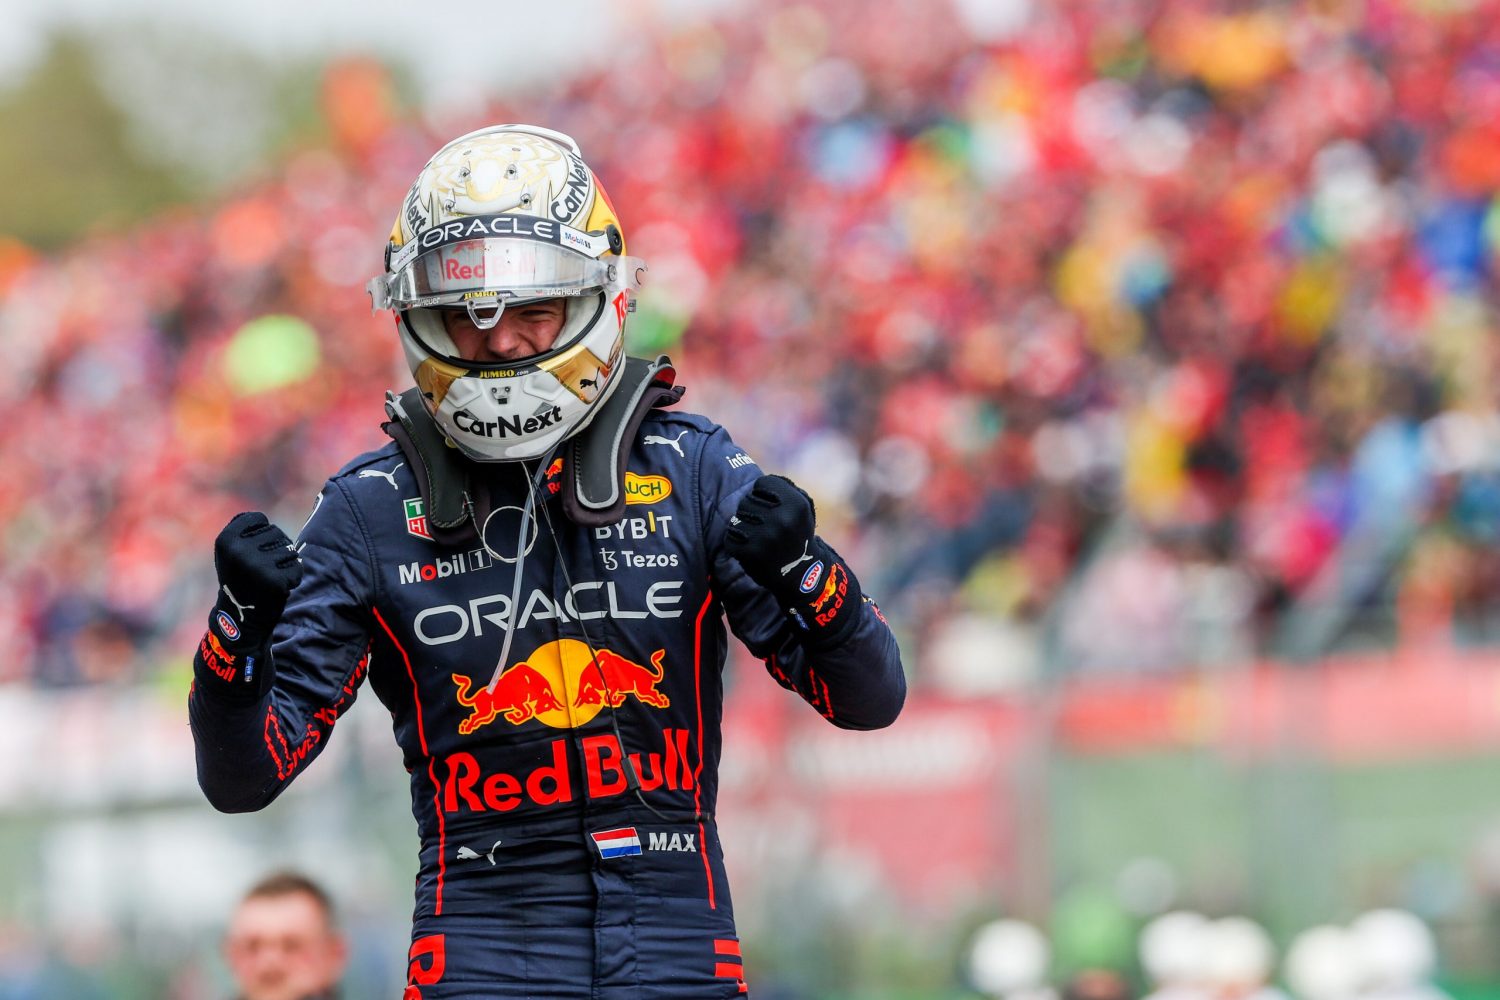 Verstappen: Miami weekend is going to be pretty crazy